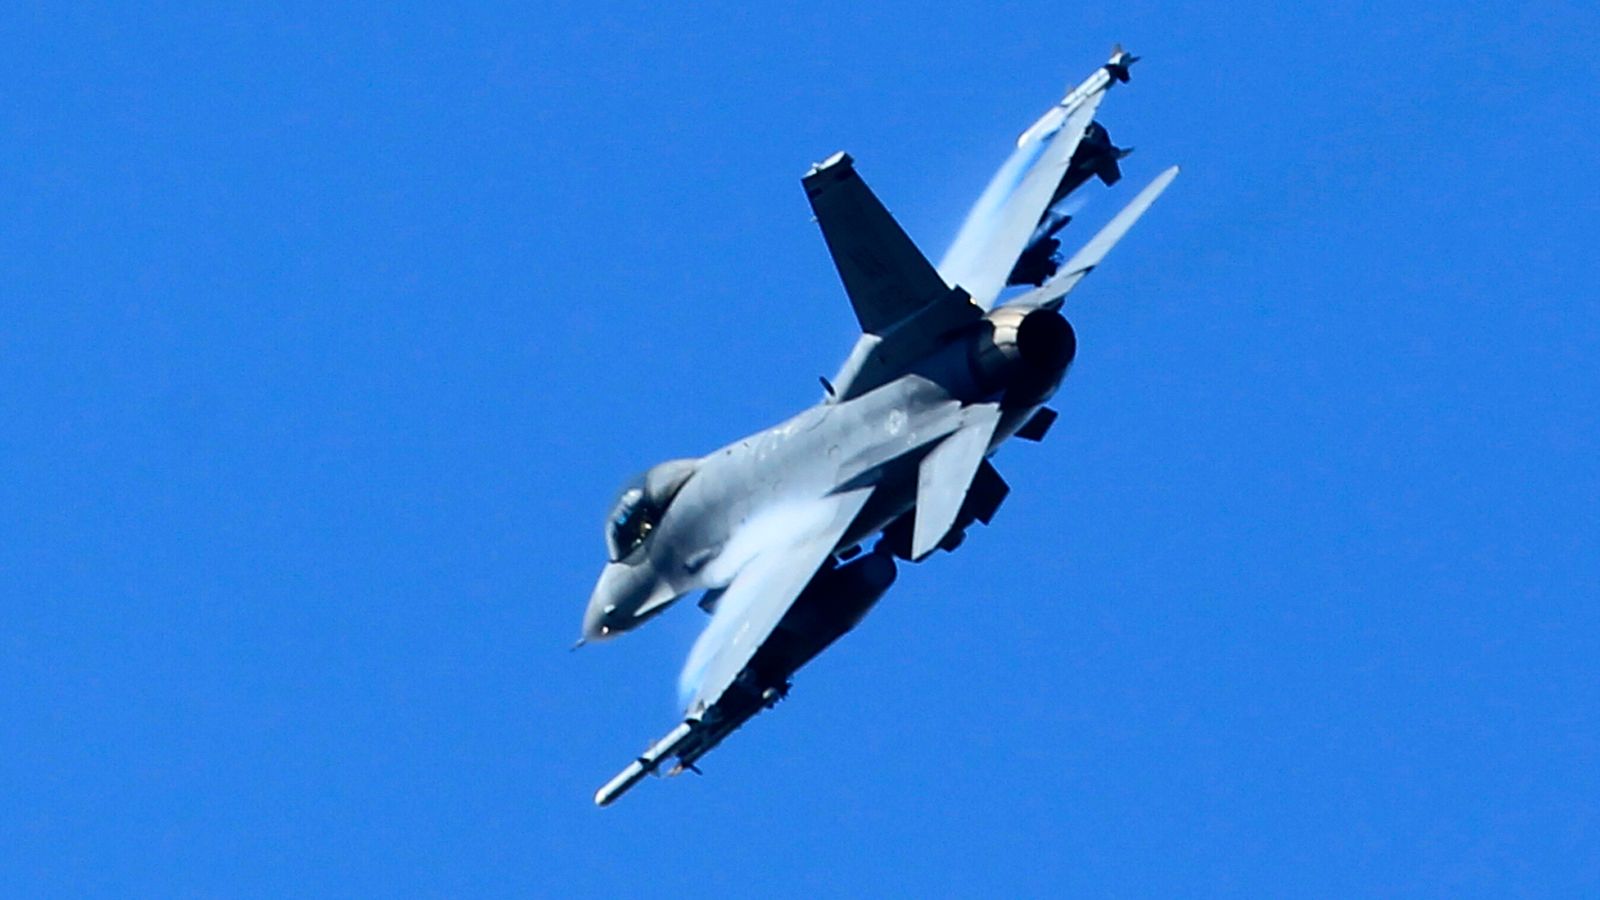 Sonic boom heard in Washington DC caused by military jets chasing small plane which crashed